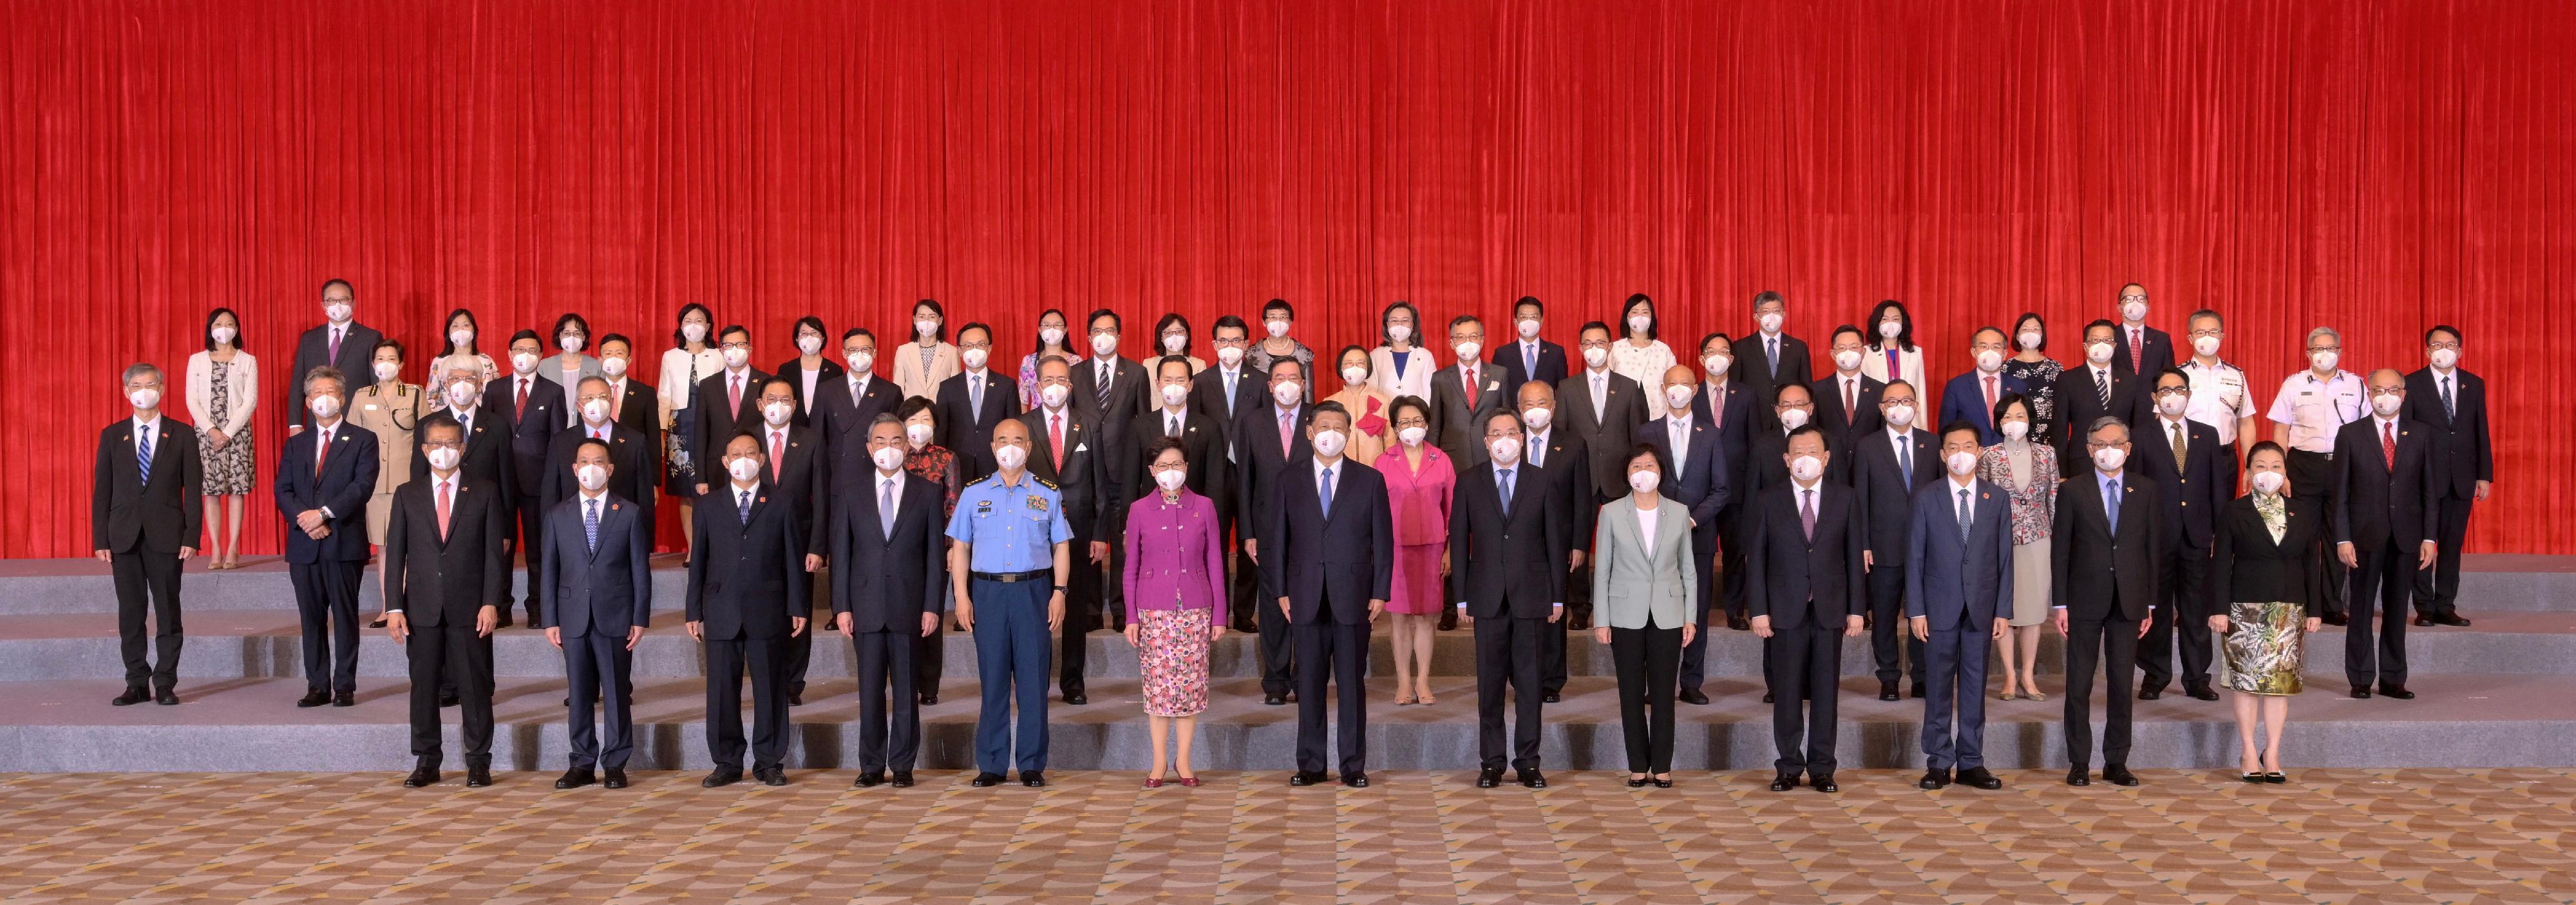 President Xi Jinping (front row, centre) is pictured with the Chief Executive, Mrs Carrie Lam (front row, sixth left), and members of the executive, the legislature and the judiciary, as well as the Principal Officials and Permanent Secretaries of the fifth-term Government of the Hong Kong Special Administrative Region this afternoon (June 30).